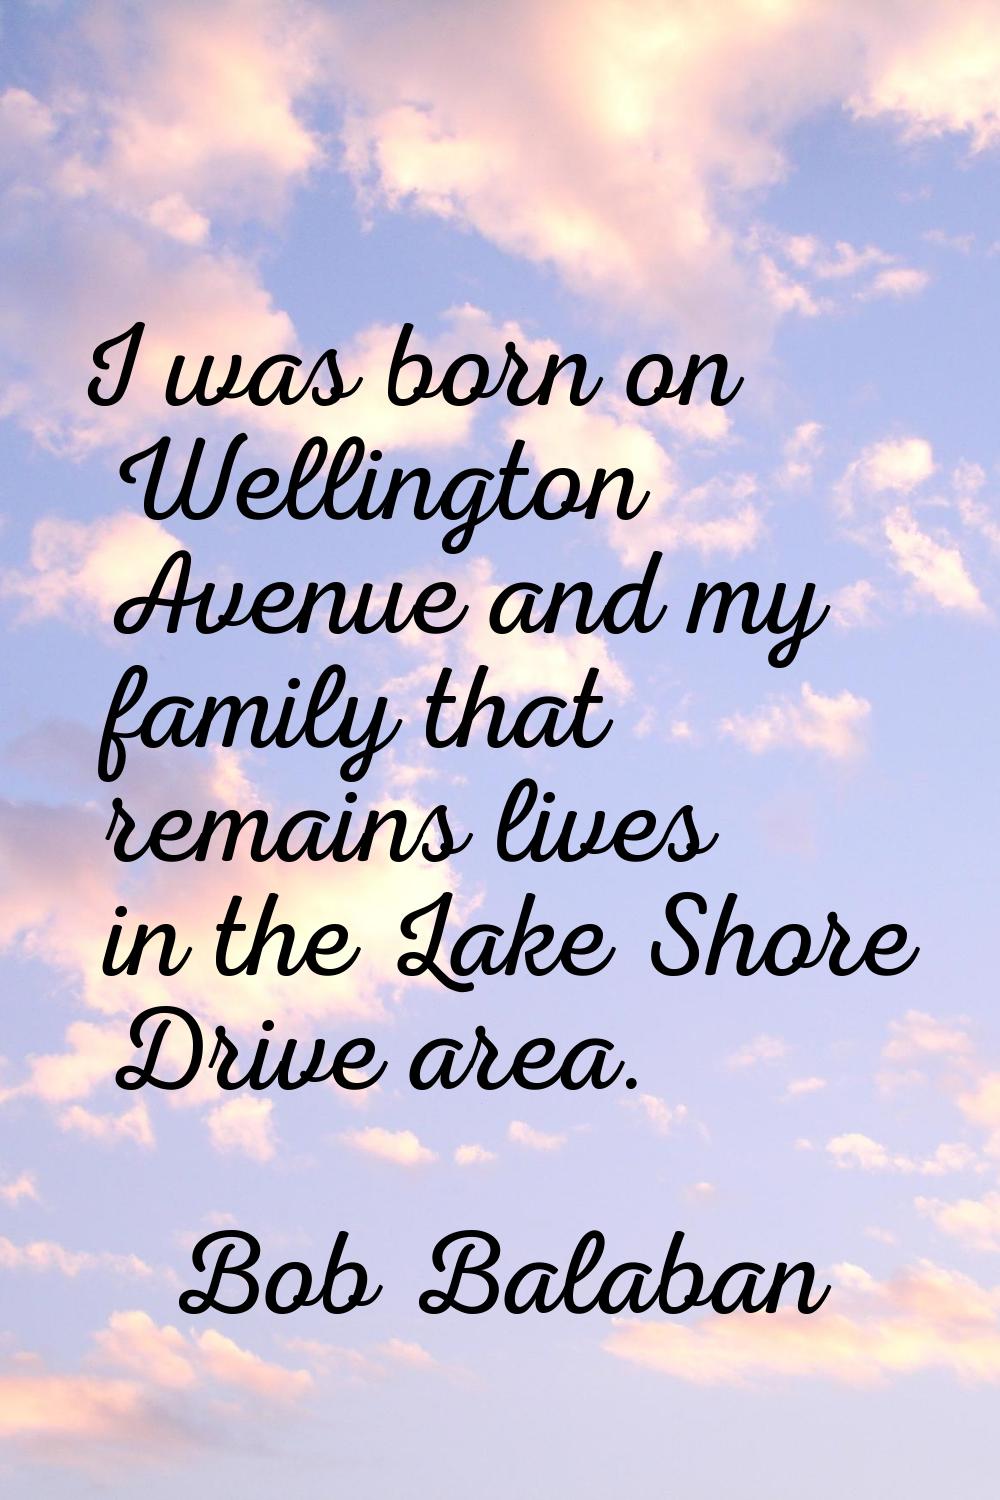 I was born on Wellington Avenue and my family that remains lives in the Lake Shore Drive area.